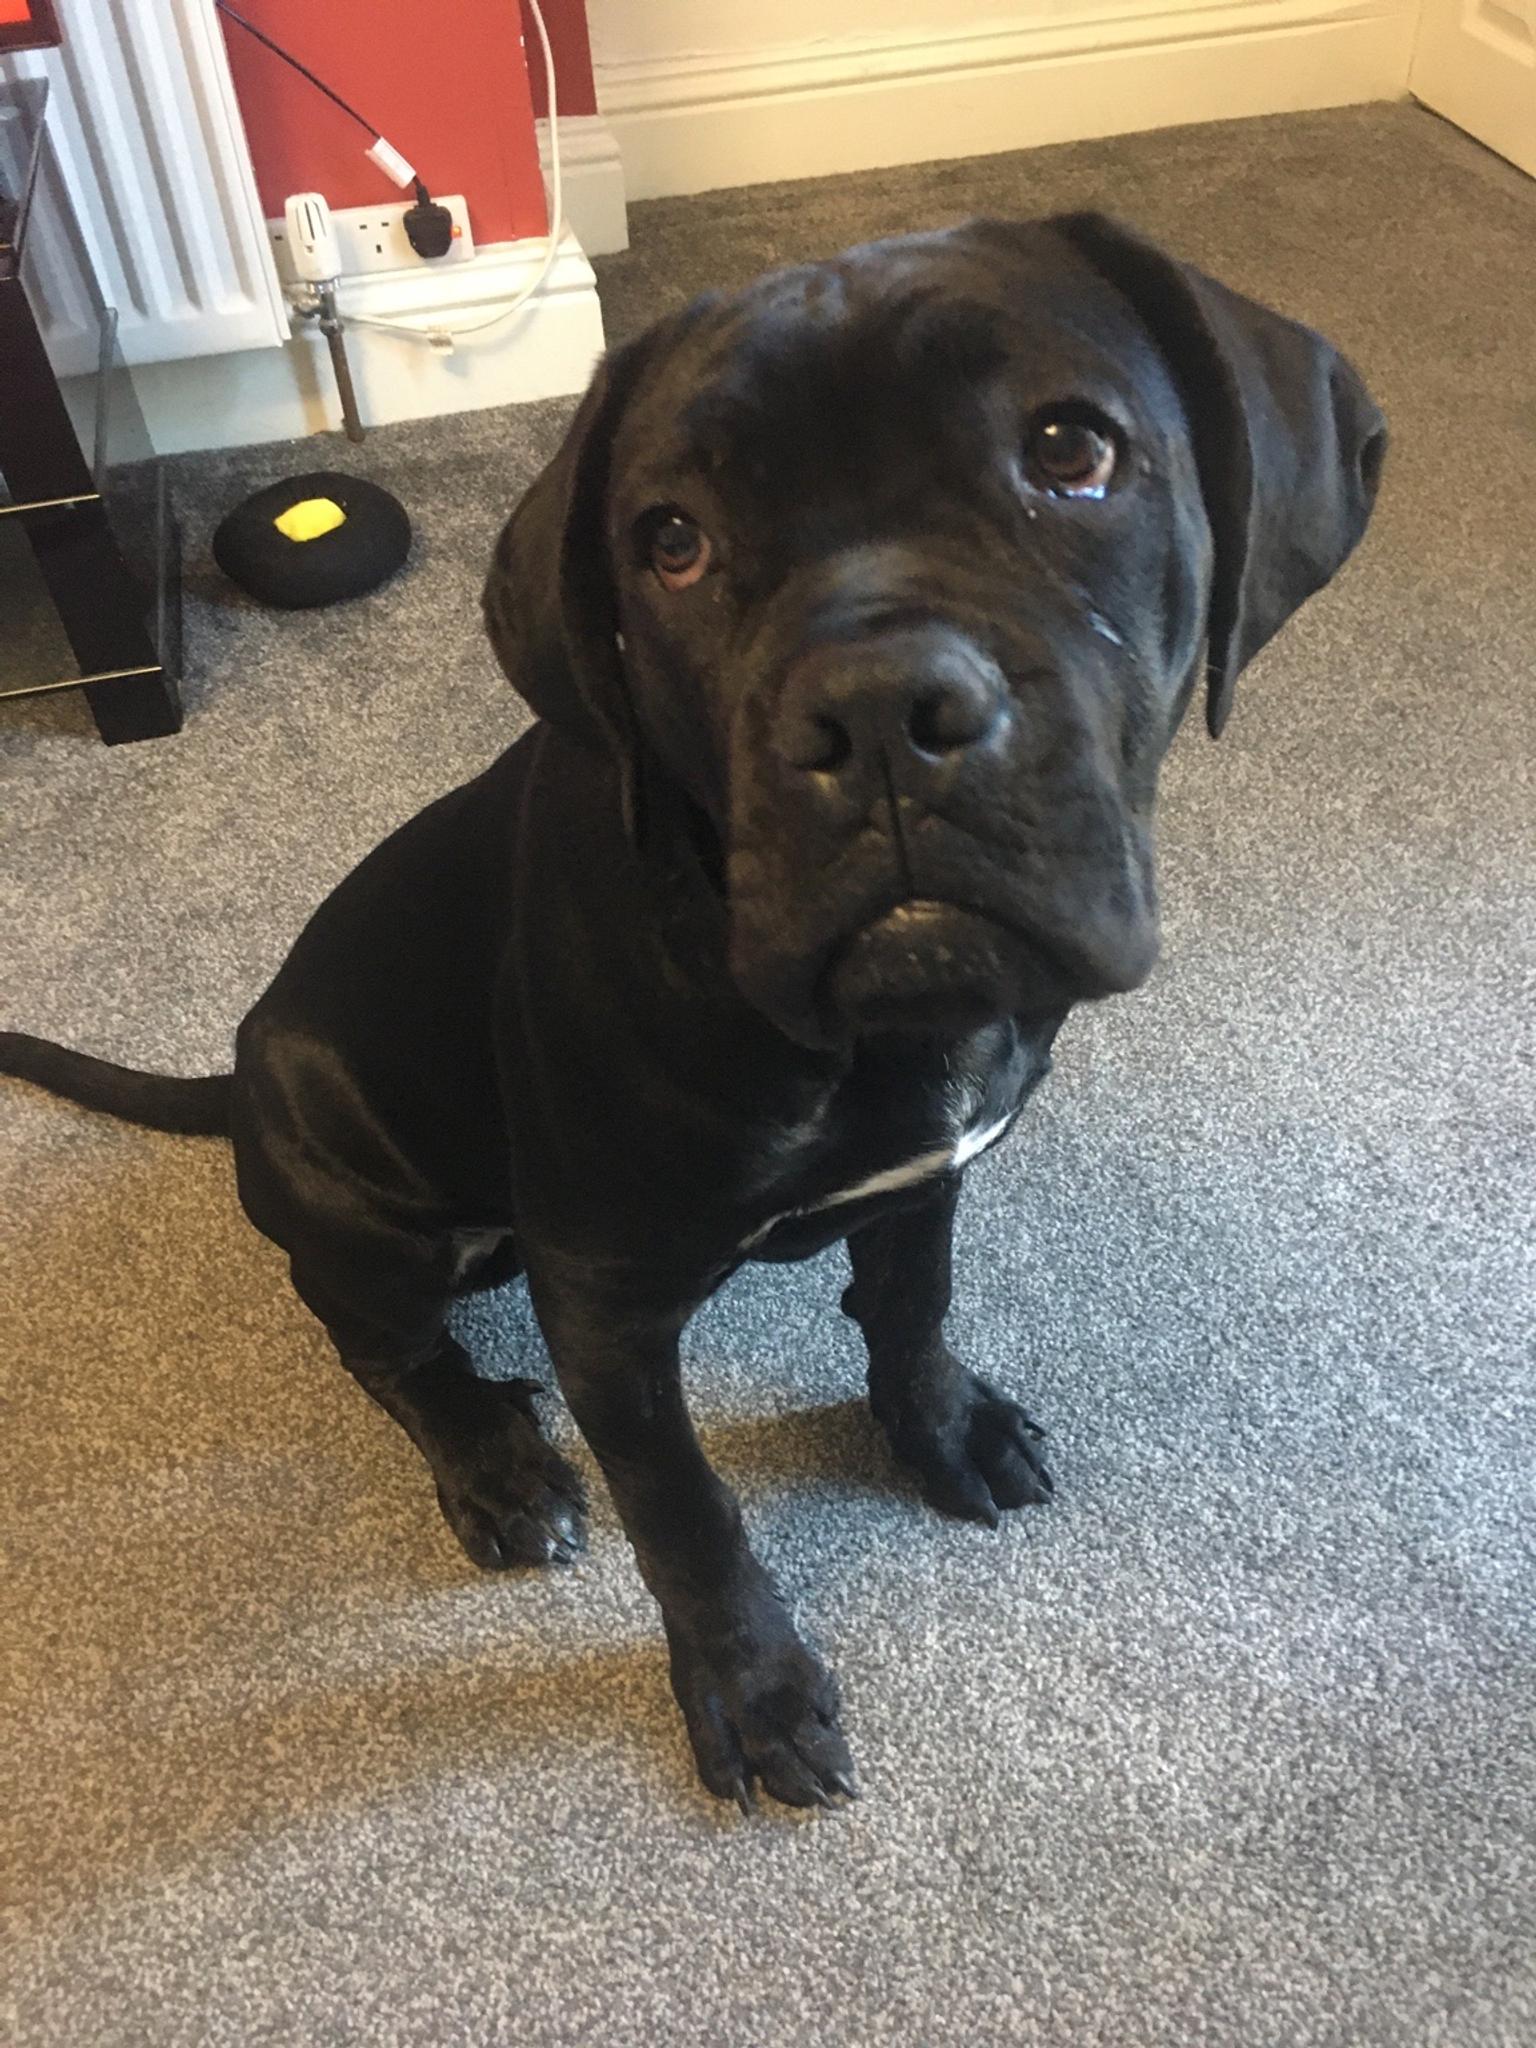 Cane Corso Puppy in SR7 Seaham for £500.00 for sale Shpock